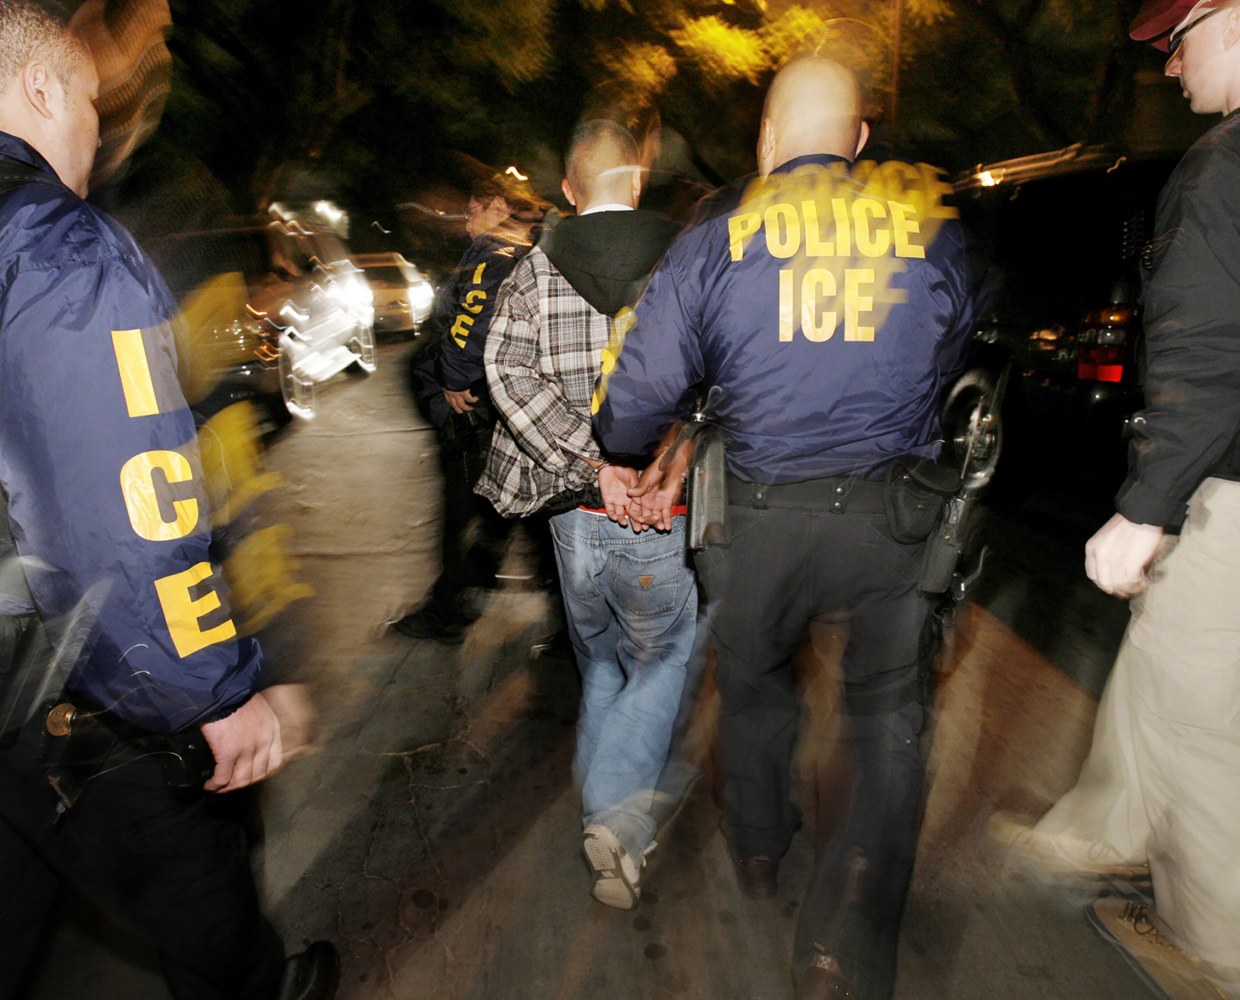 Homeland Security Cancels Massive Roundups of Undocumented Immigrants